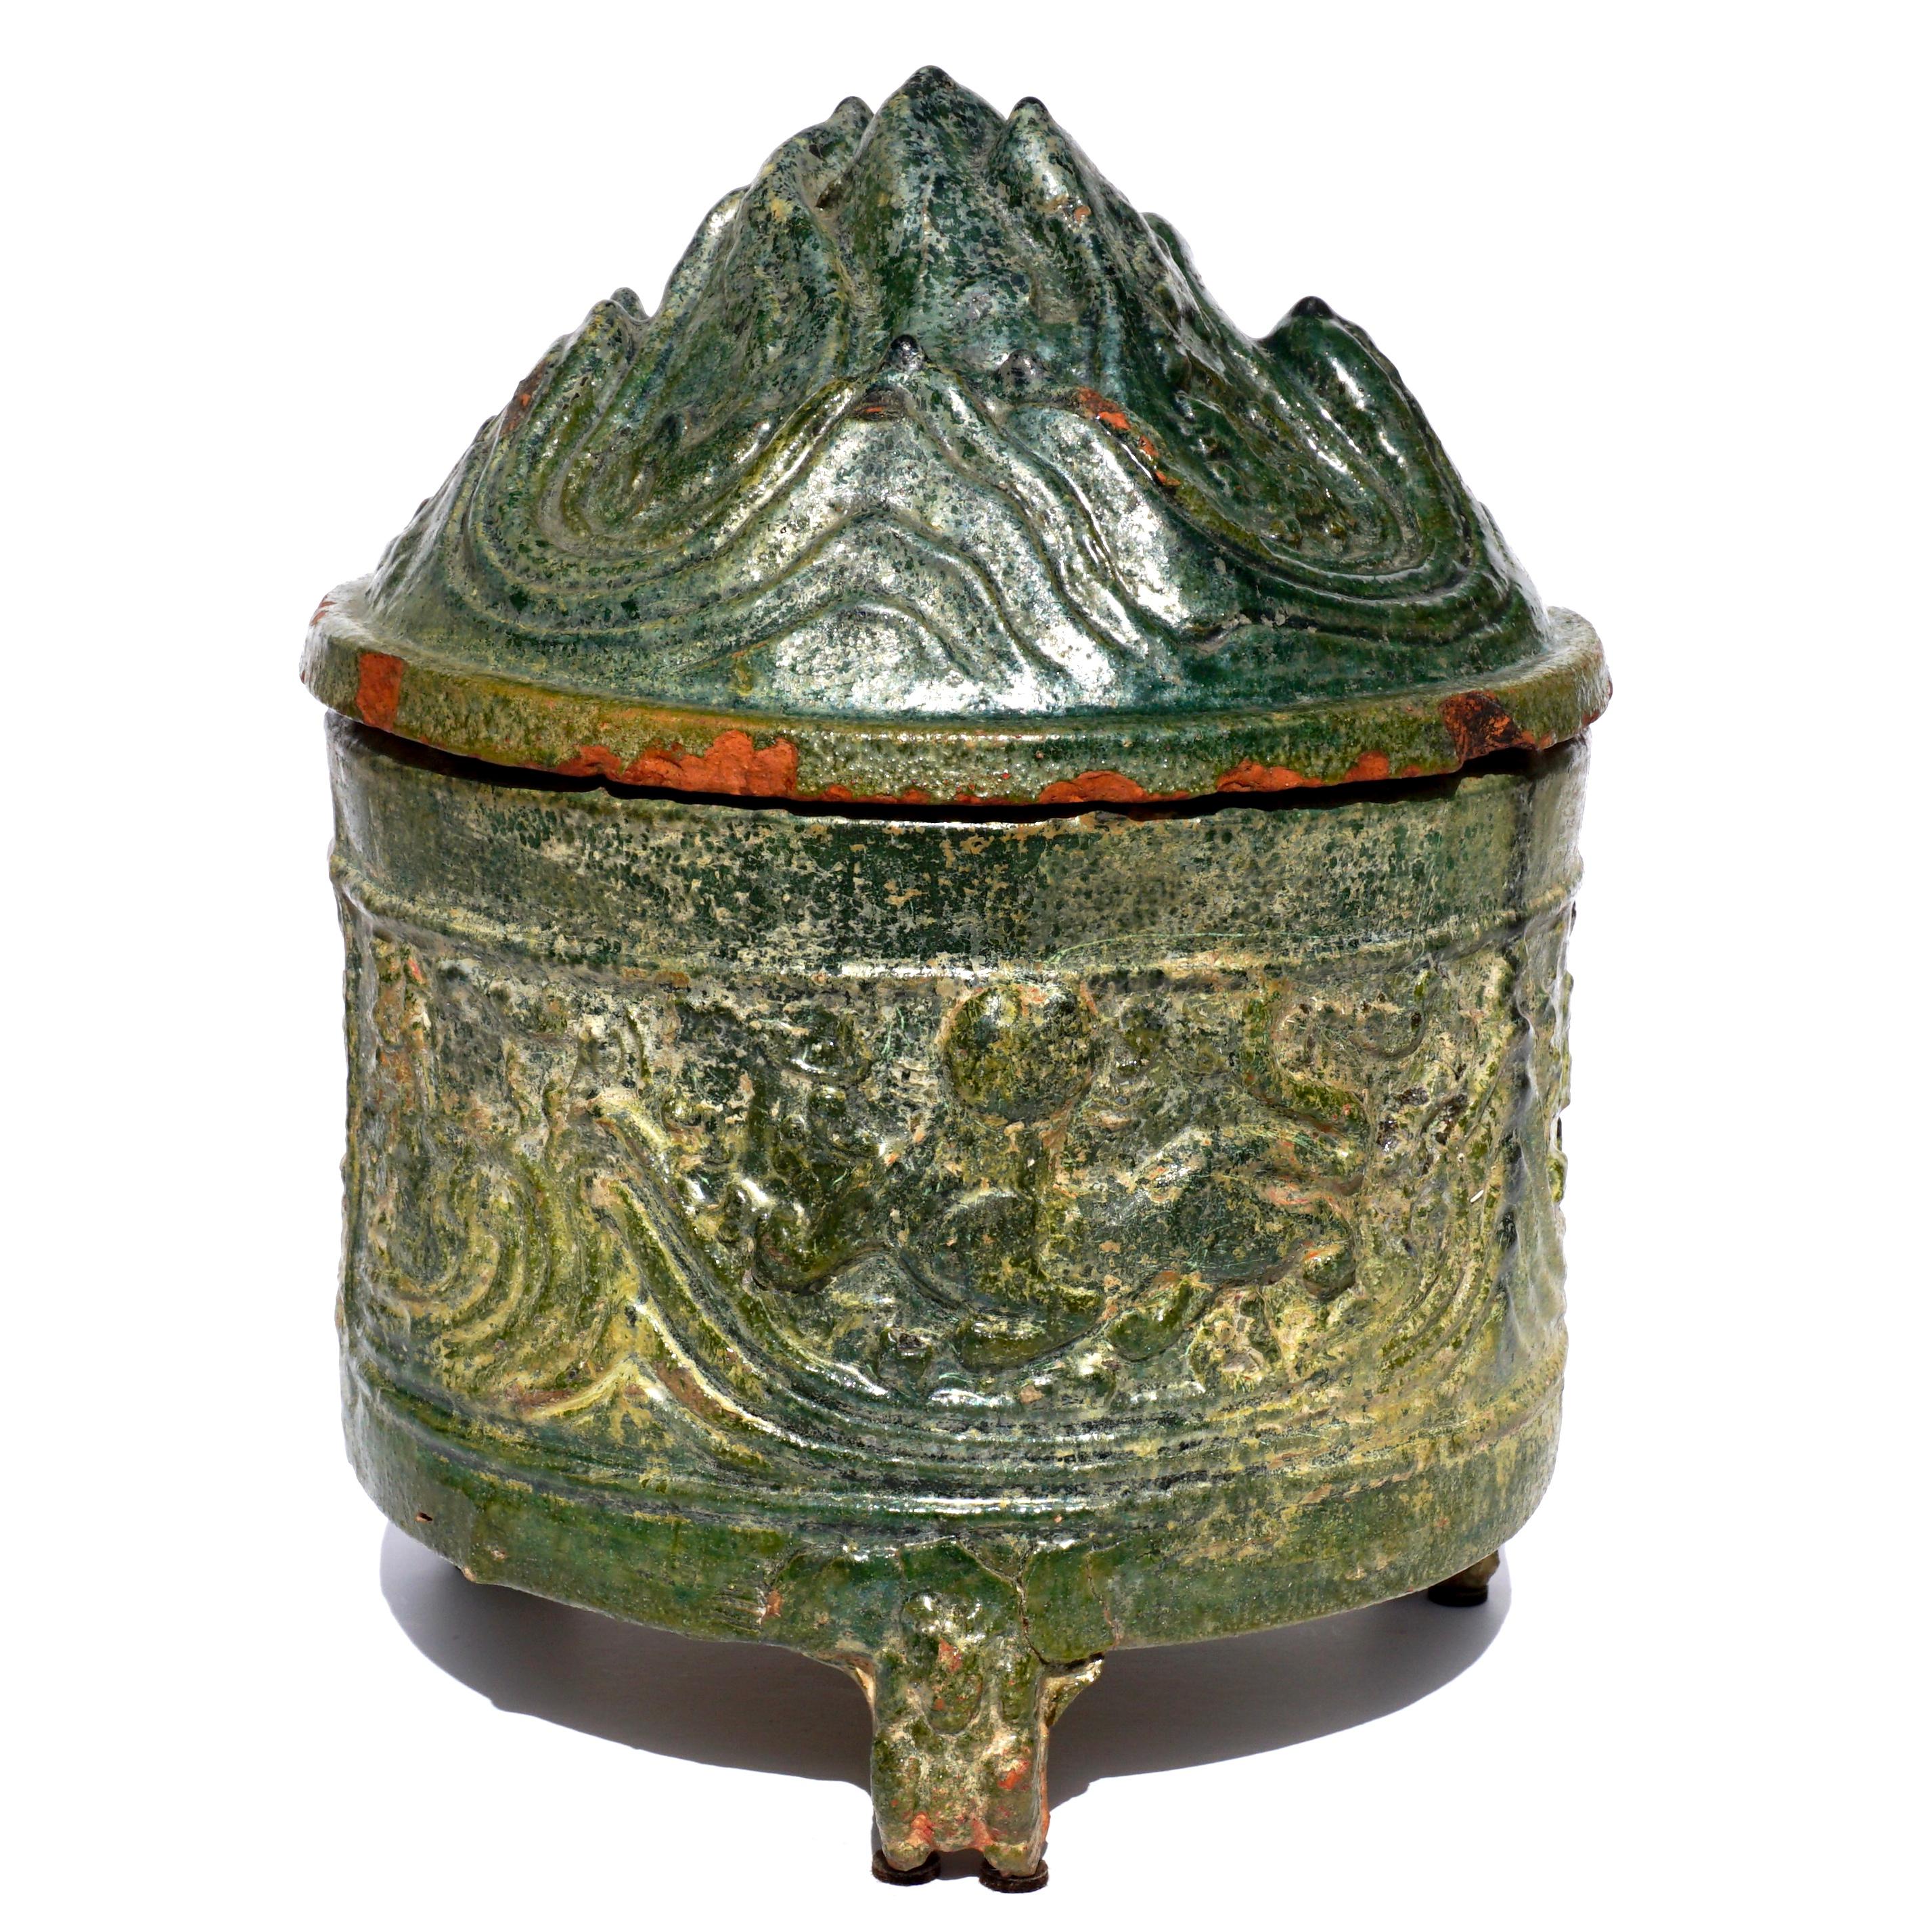 Han earthenware celadon glazed hill jar

The hill jar represents the five scared mountains which is the path between the earth and paradise. The scared mountains are filled with animals that live there.

This jar might also represent either Mount Bo